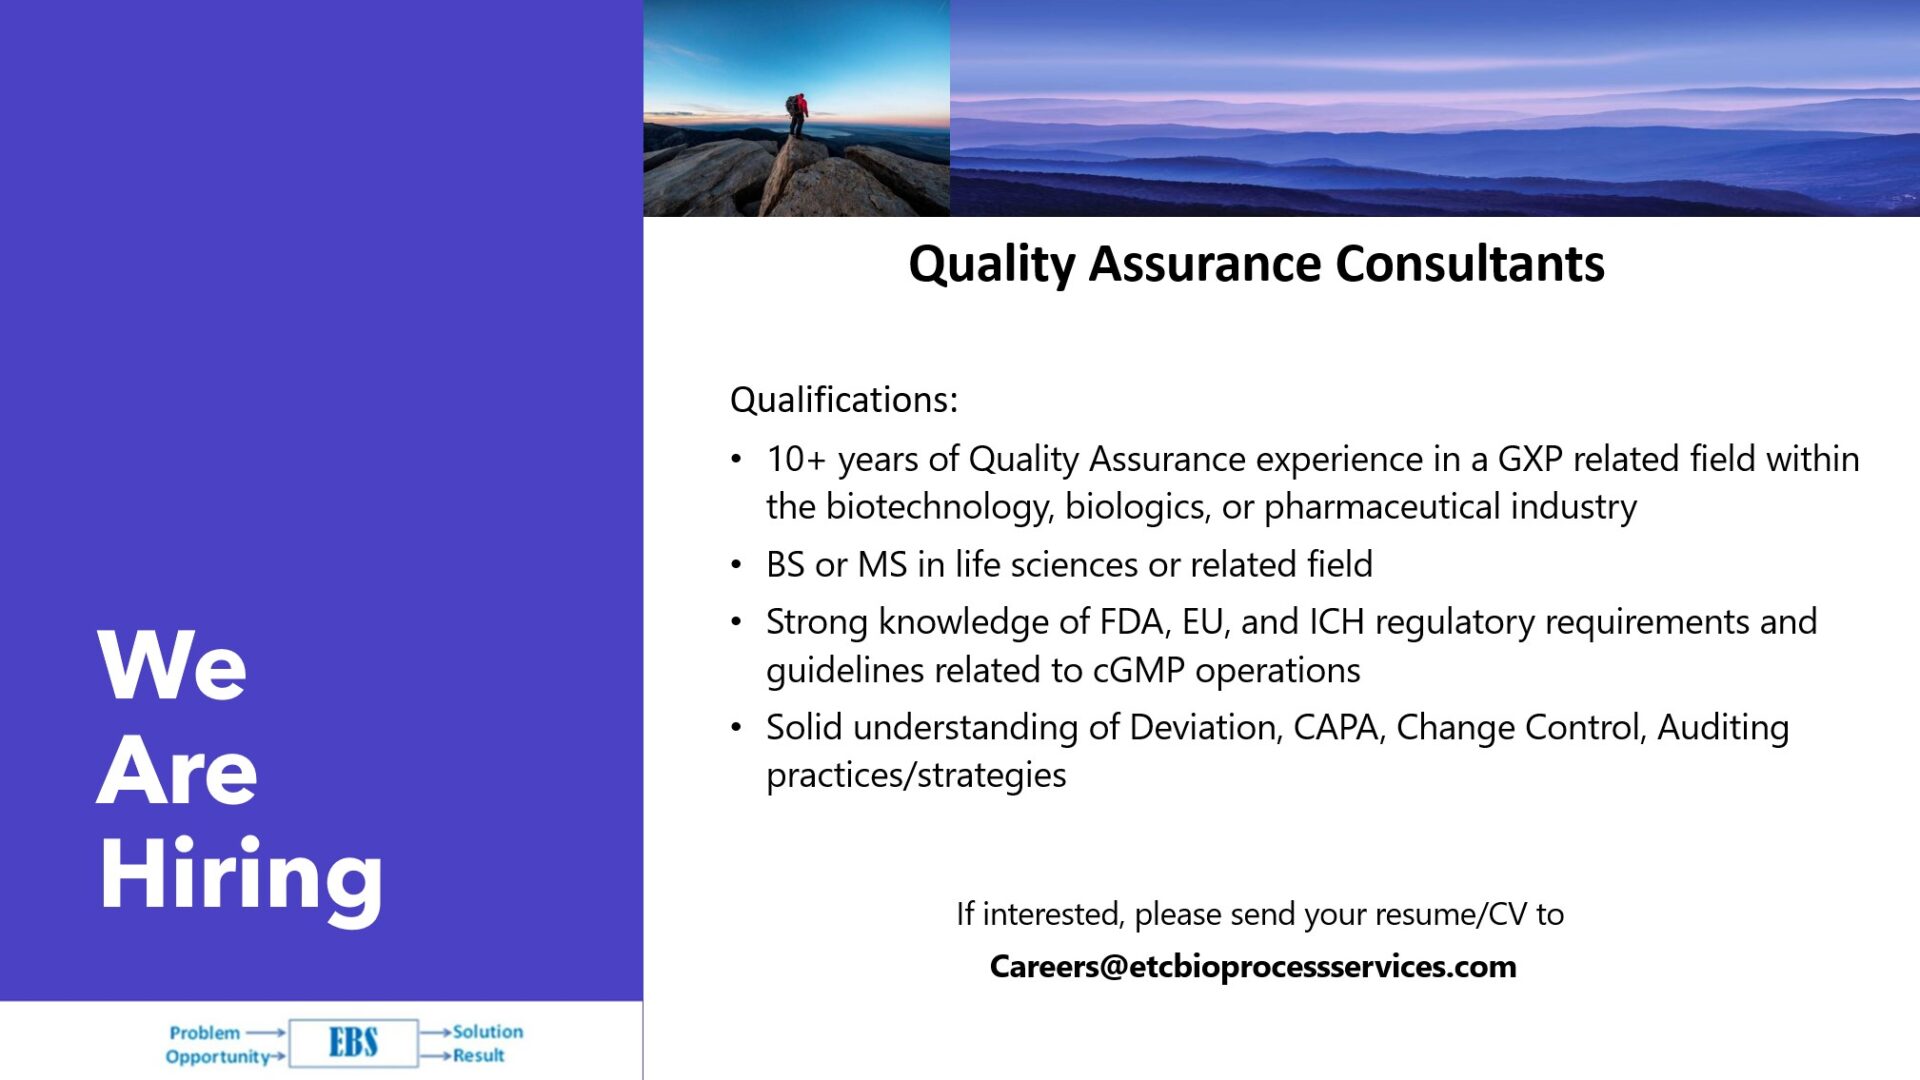 Quality Assurance Consultants